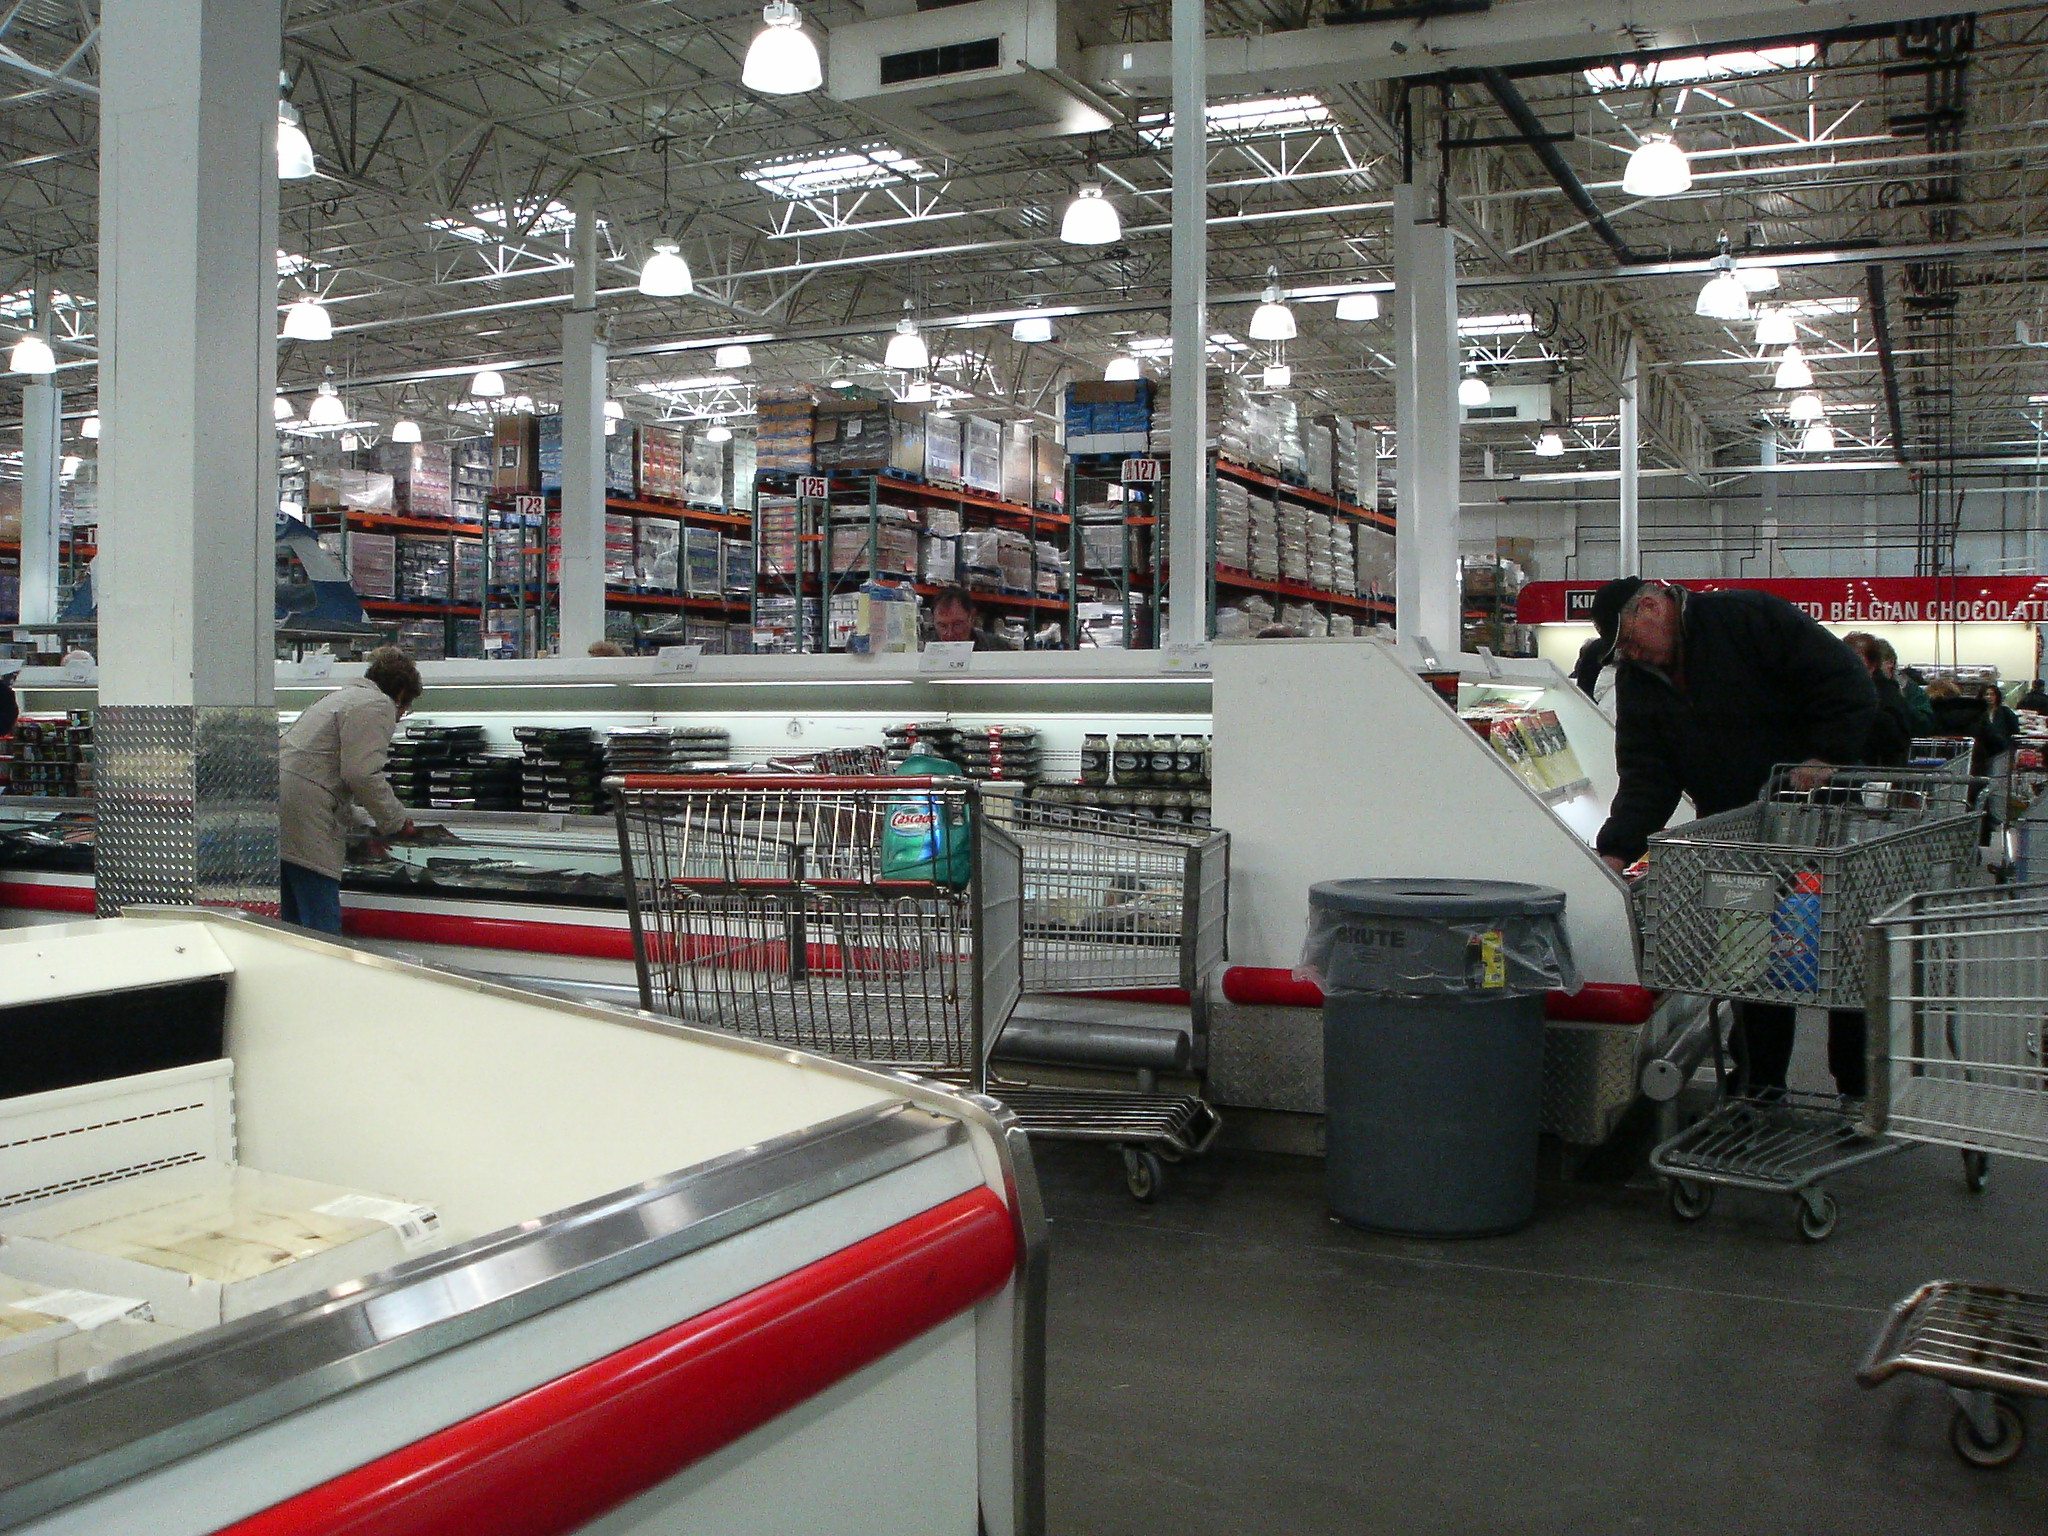 people working in a large warehouse filled with shelves